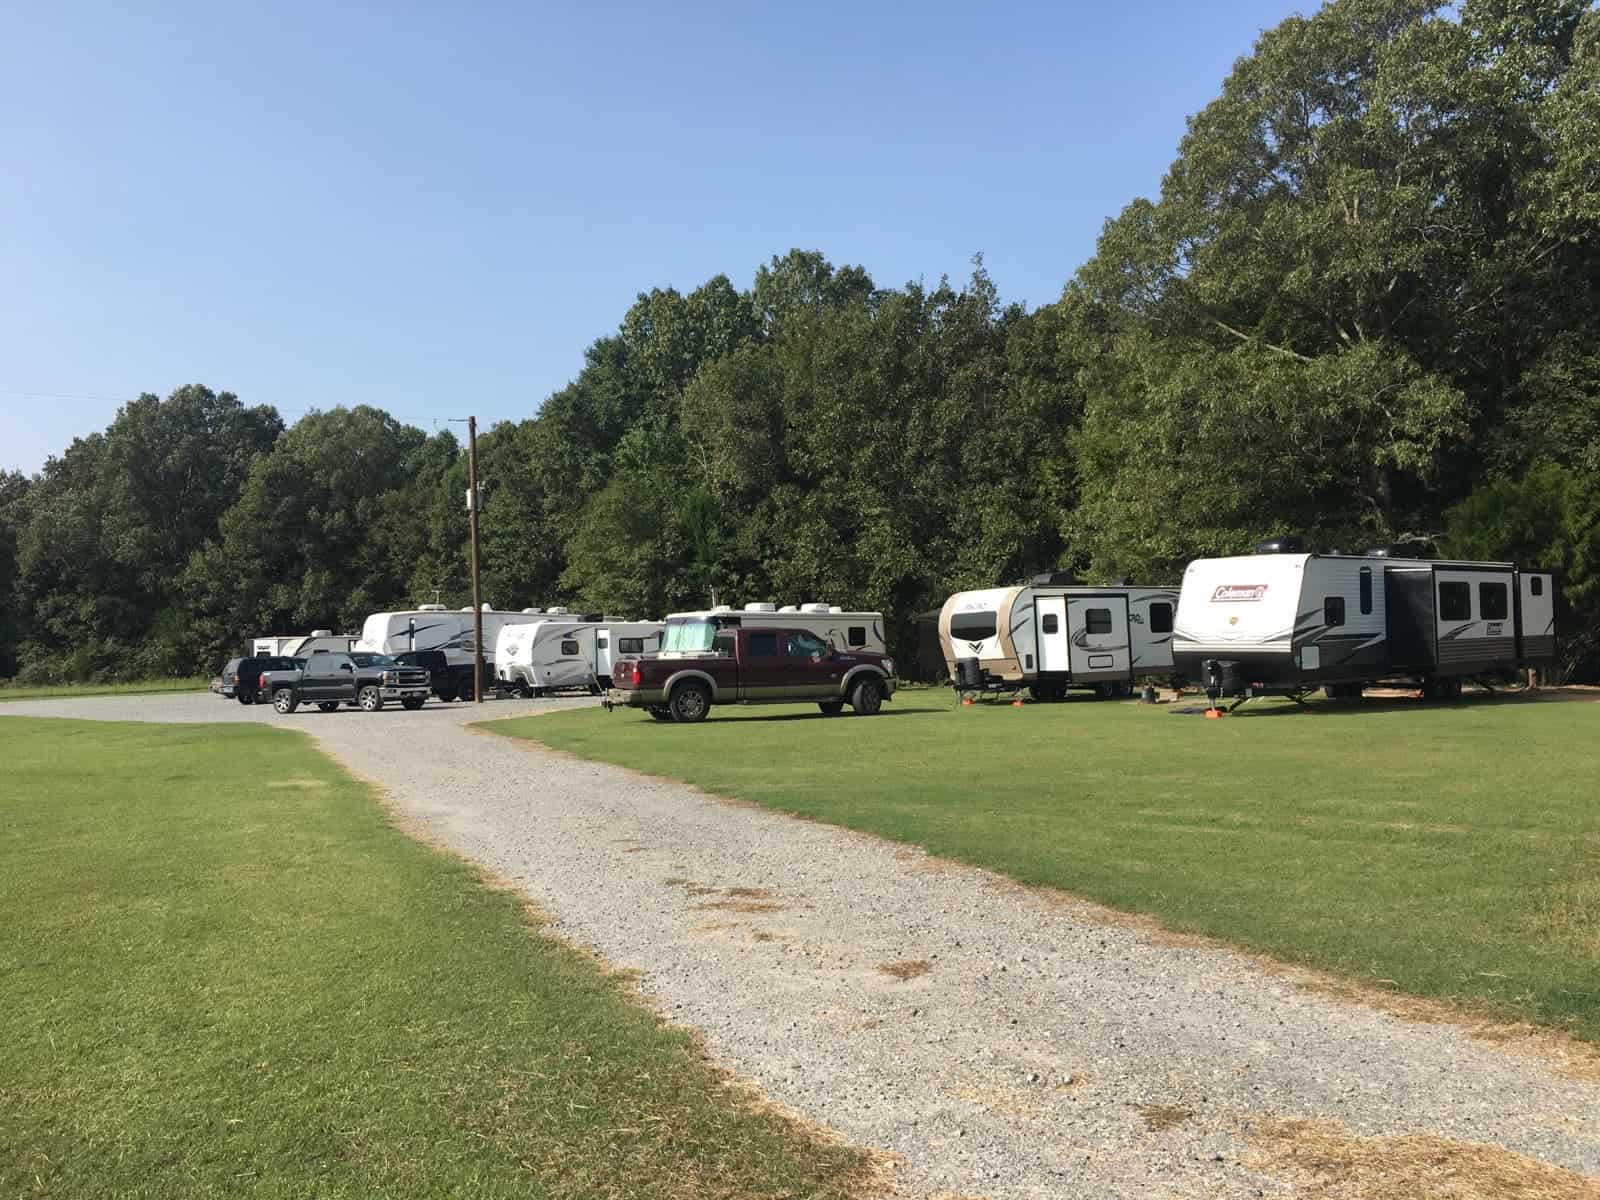 A short gravel road leads to an open lot, where several RVs, campers, and trucks are parked near shady trees.